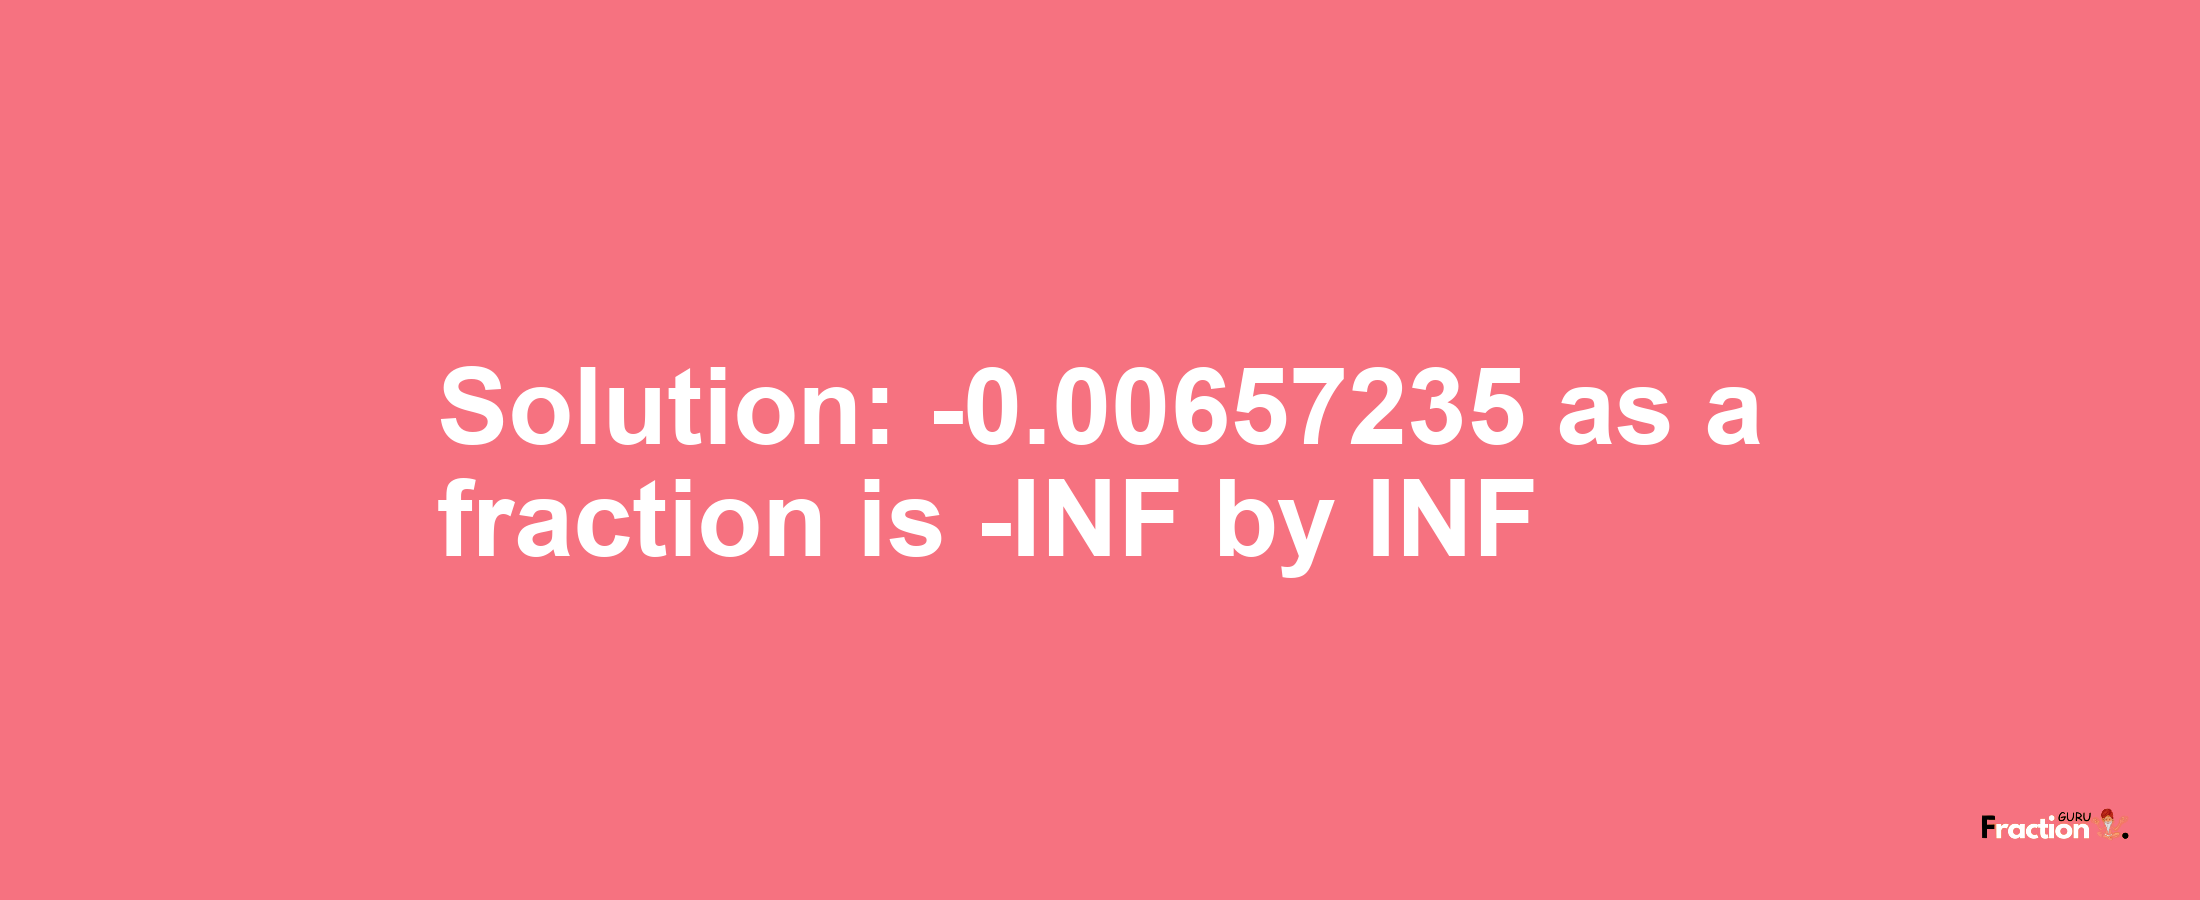 Solution:-0.00657235 as a fraction is -INF/INF